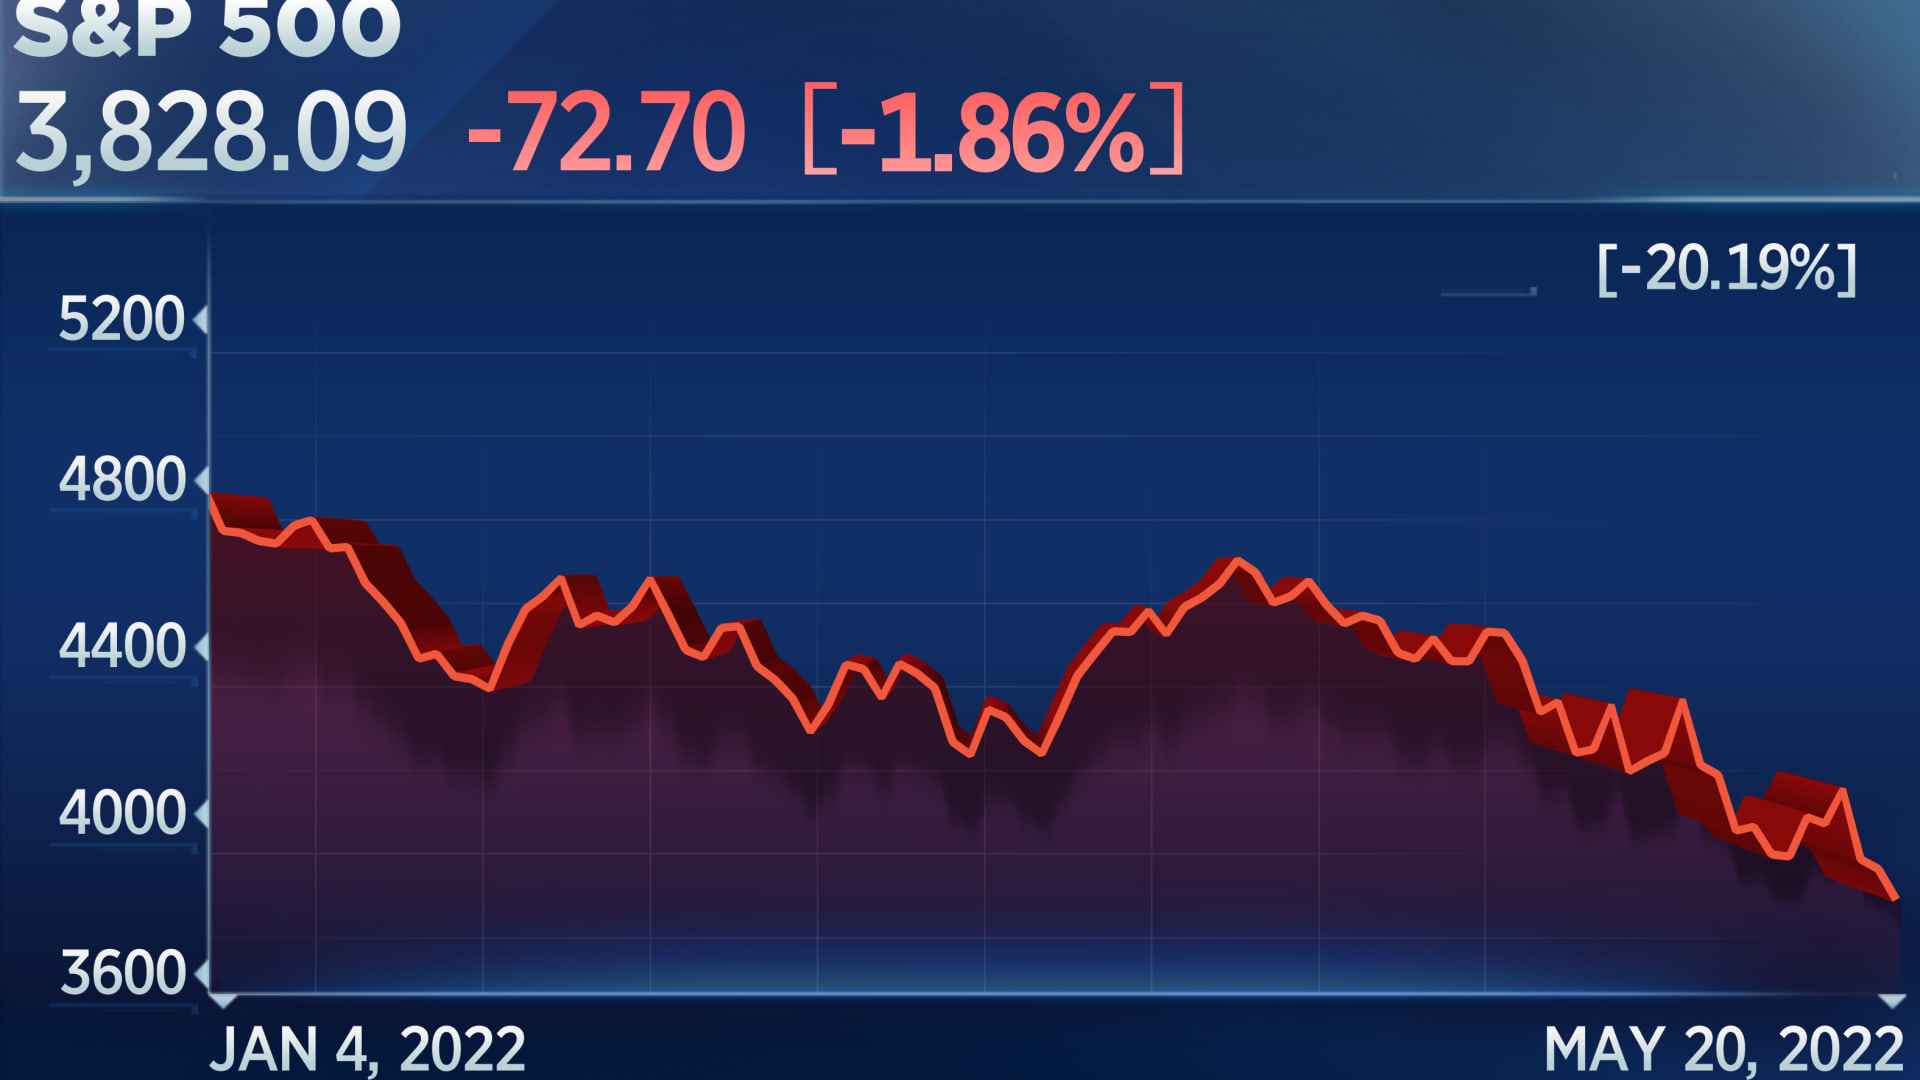 Rising recession fears pushed U.S. stocks into a bear market on Friday with the S&P 500's decline from its all-time high in January now reach